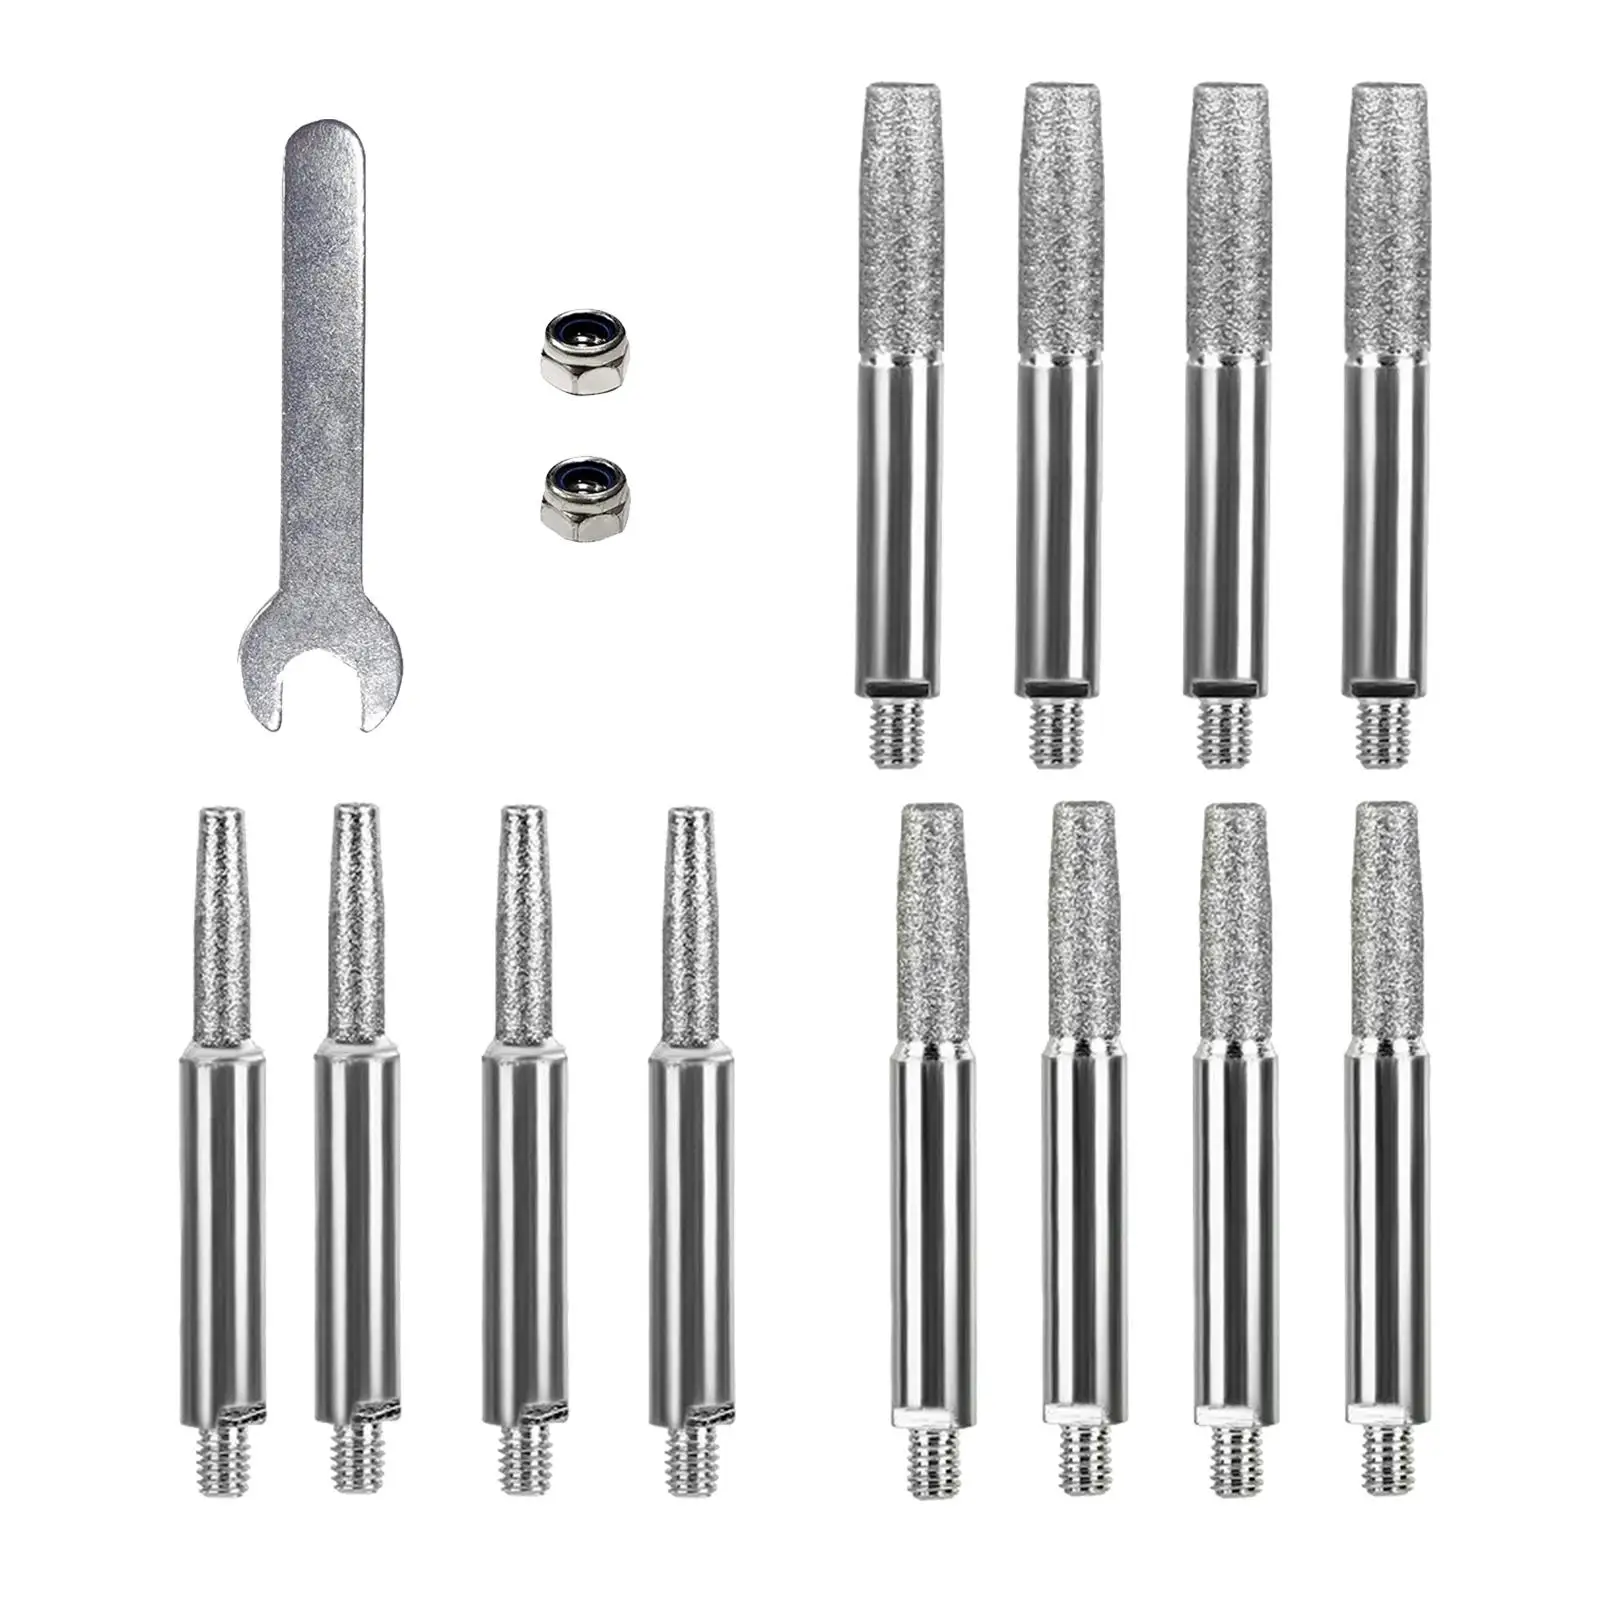 Burr Bit Set Hardness for Steel and Wood Working Polishing Carving